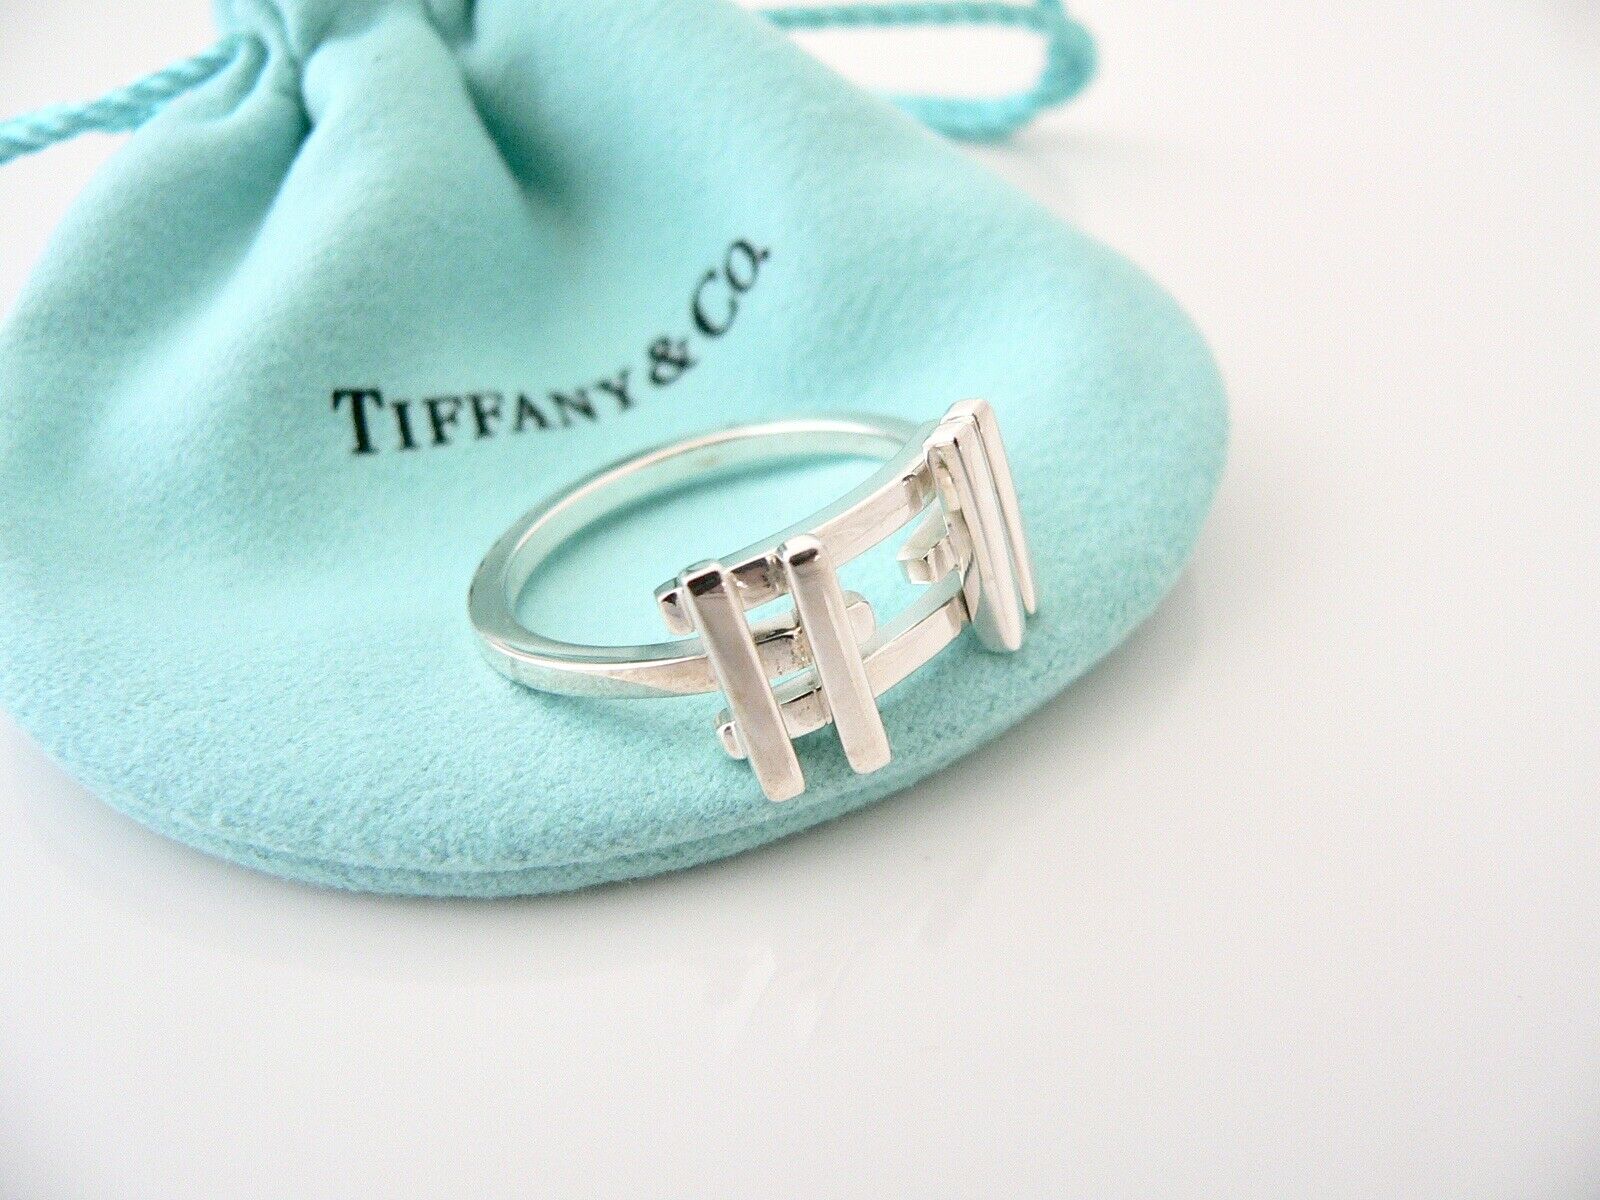 Tiffany & Co Axis Ring Band Sz 11 Pouch Gift Art Frank Gehry Silver Love Classic